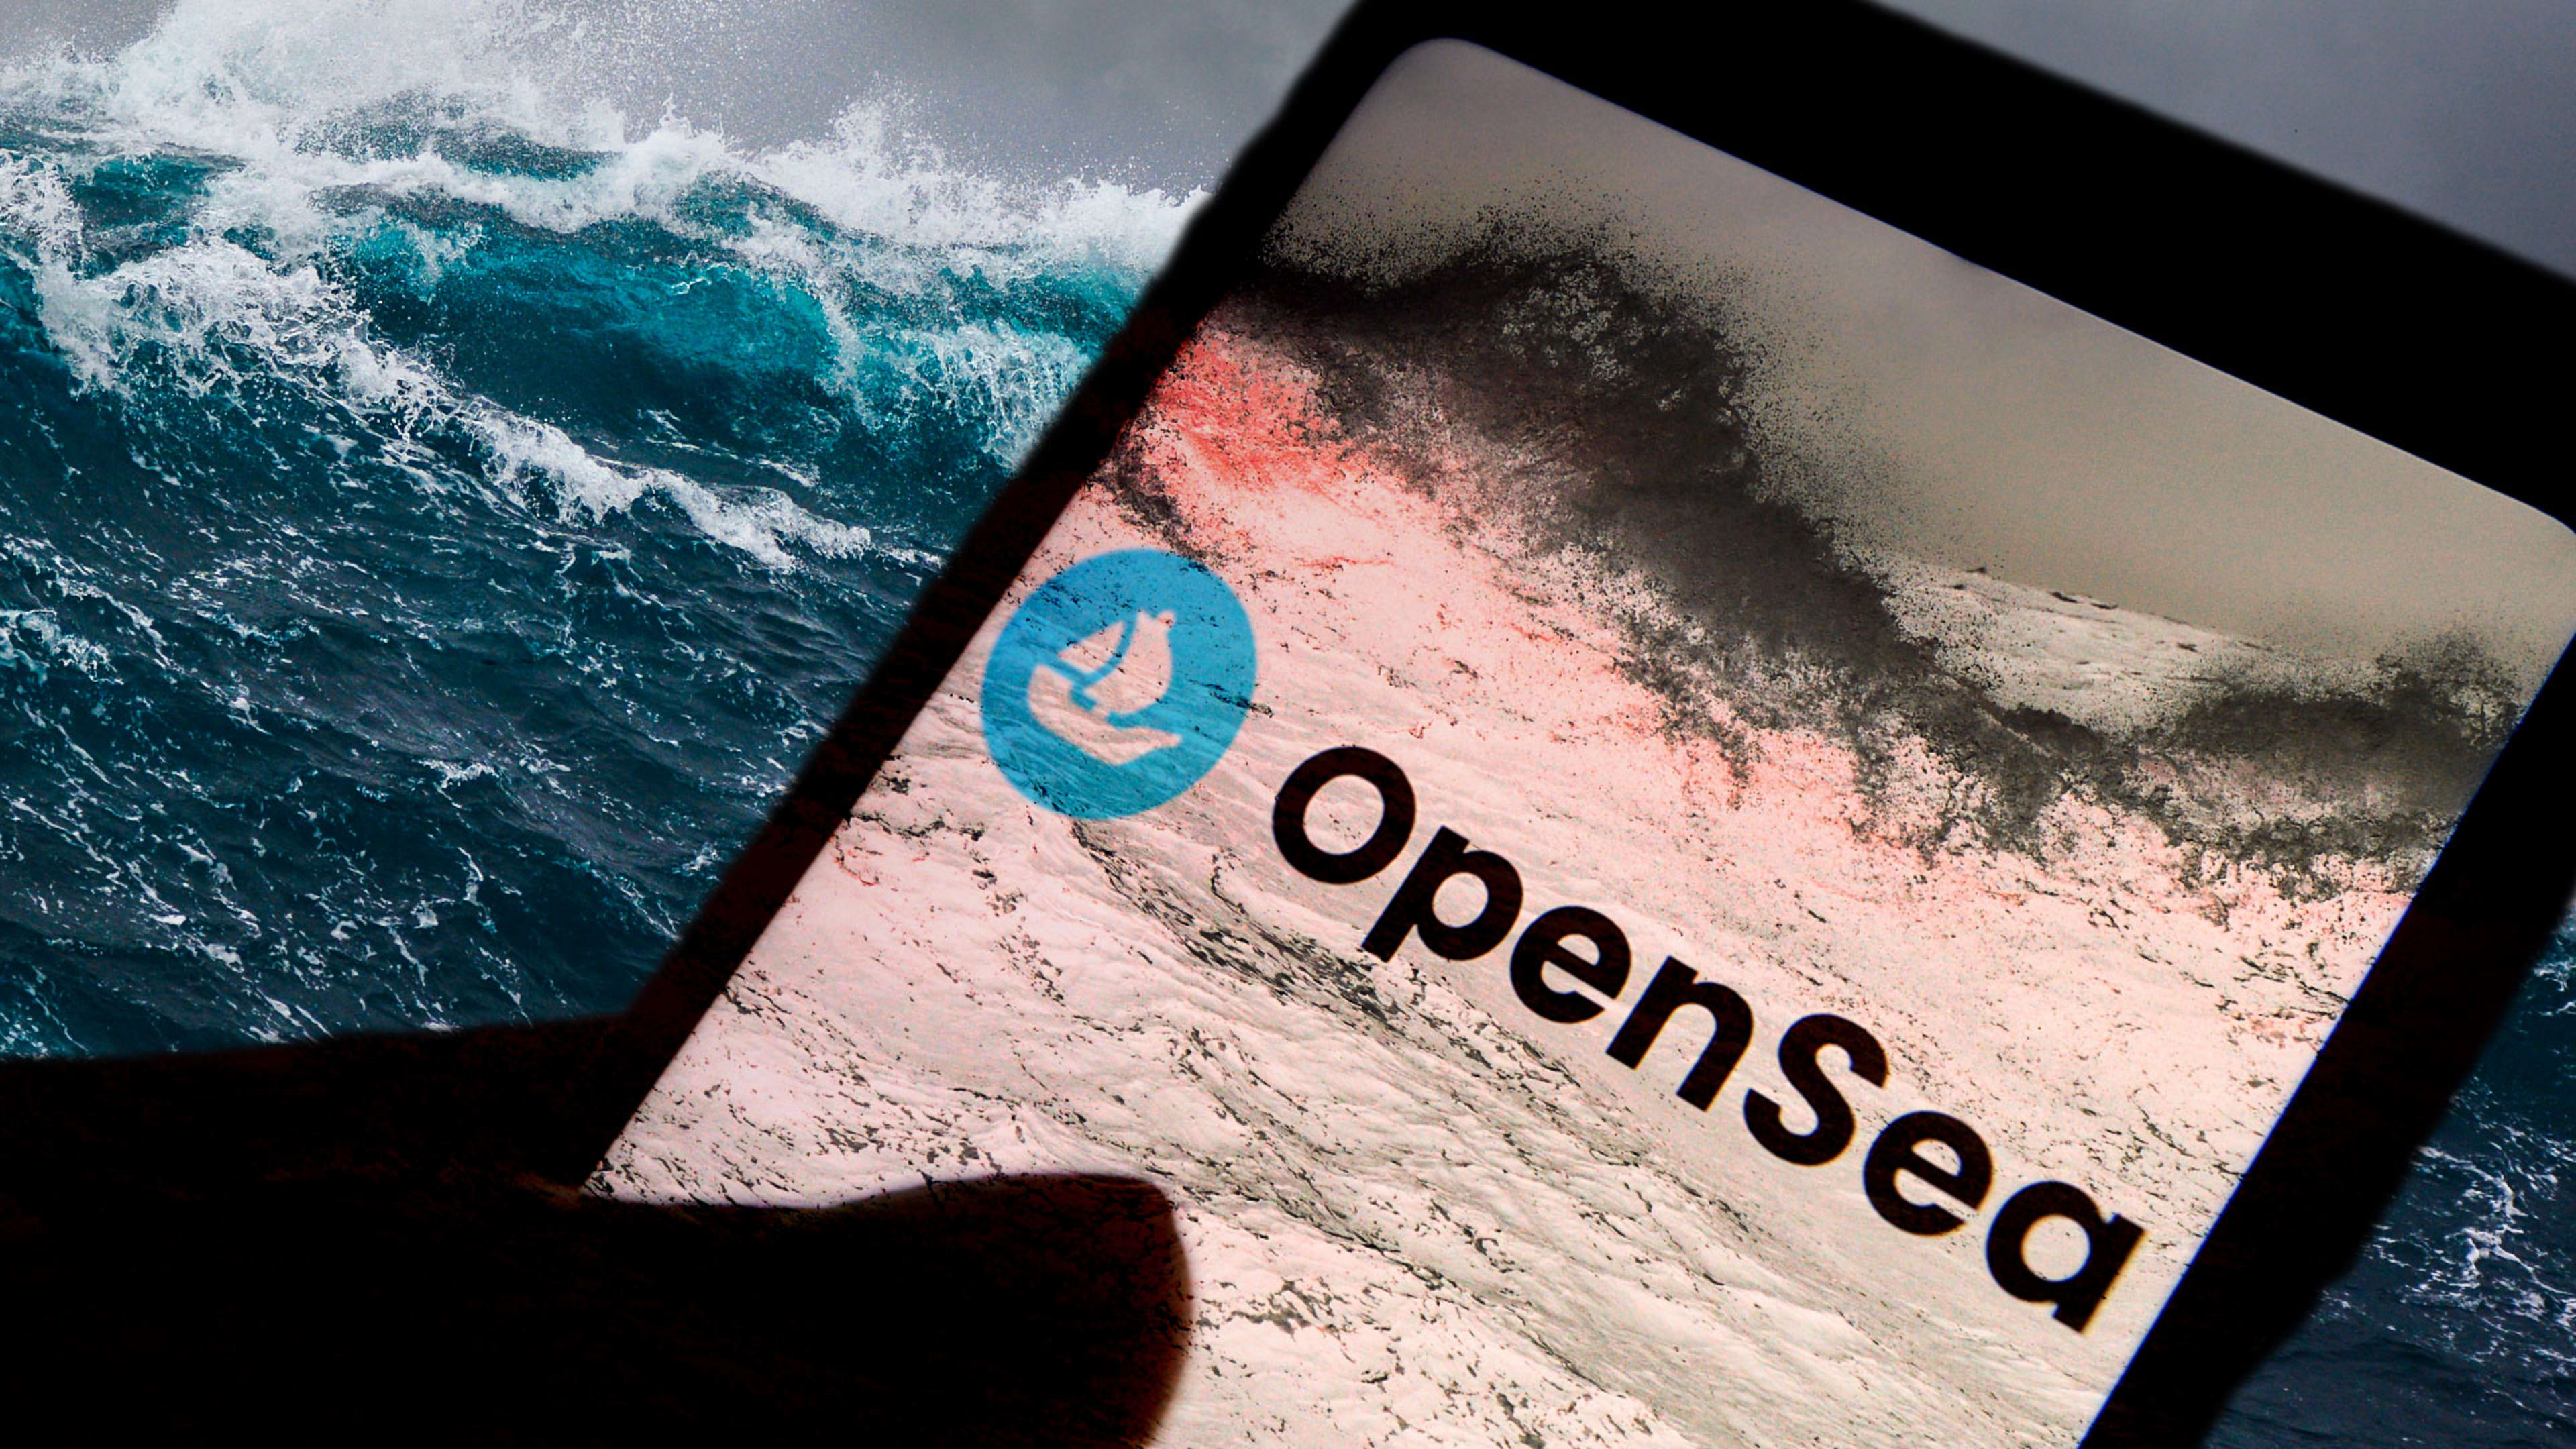 OpenSea NFT heist: Attackers make off with millions of digital assets